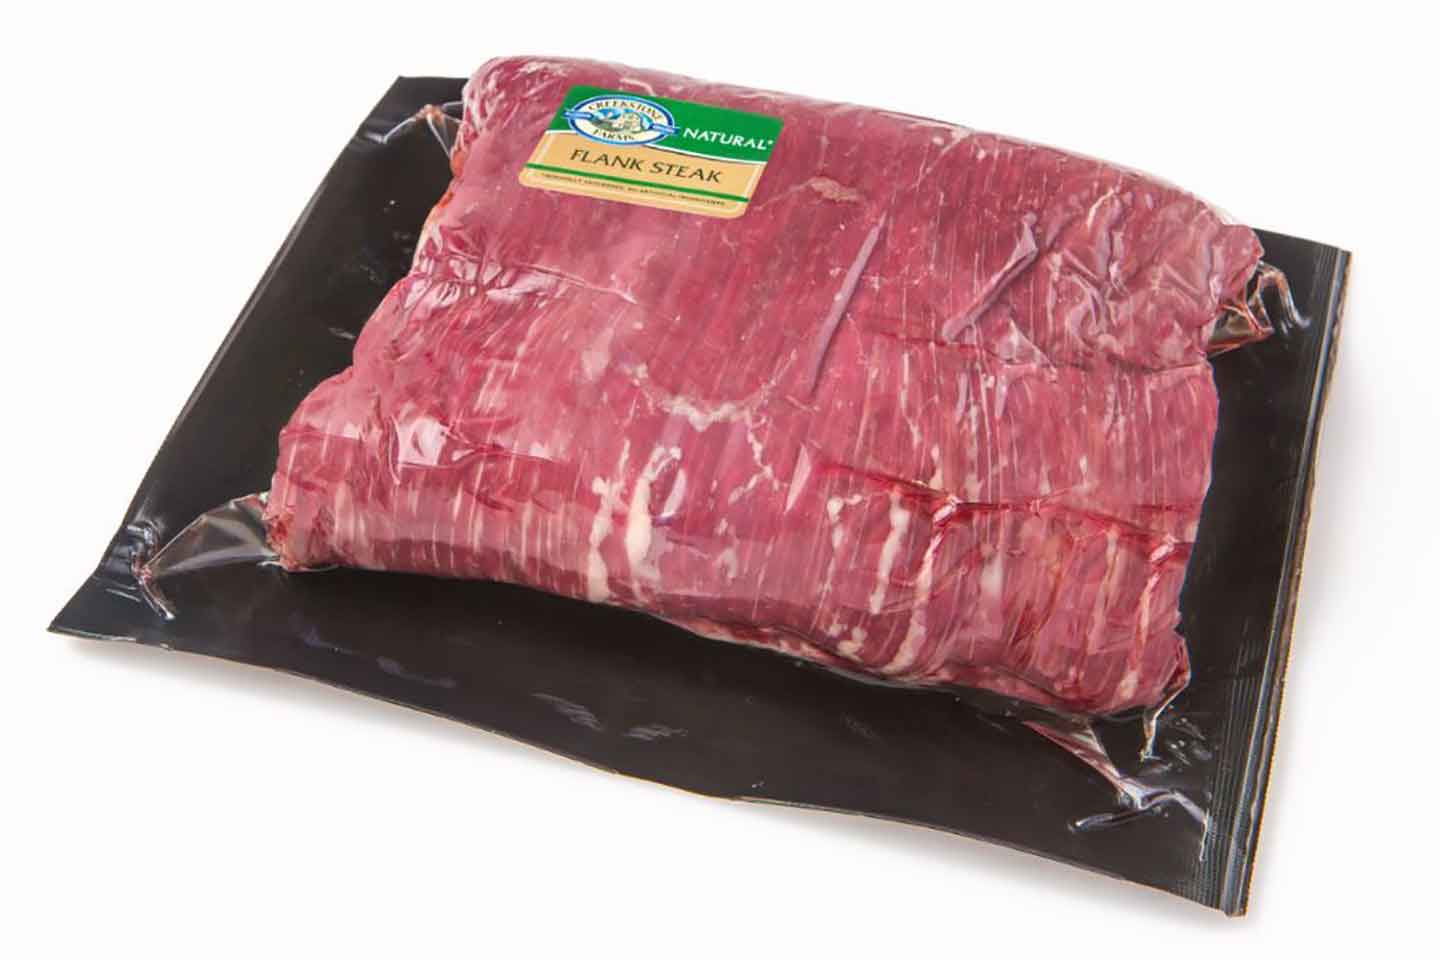 What is a Flank Steak?